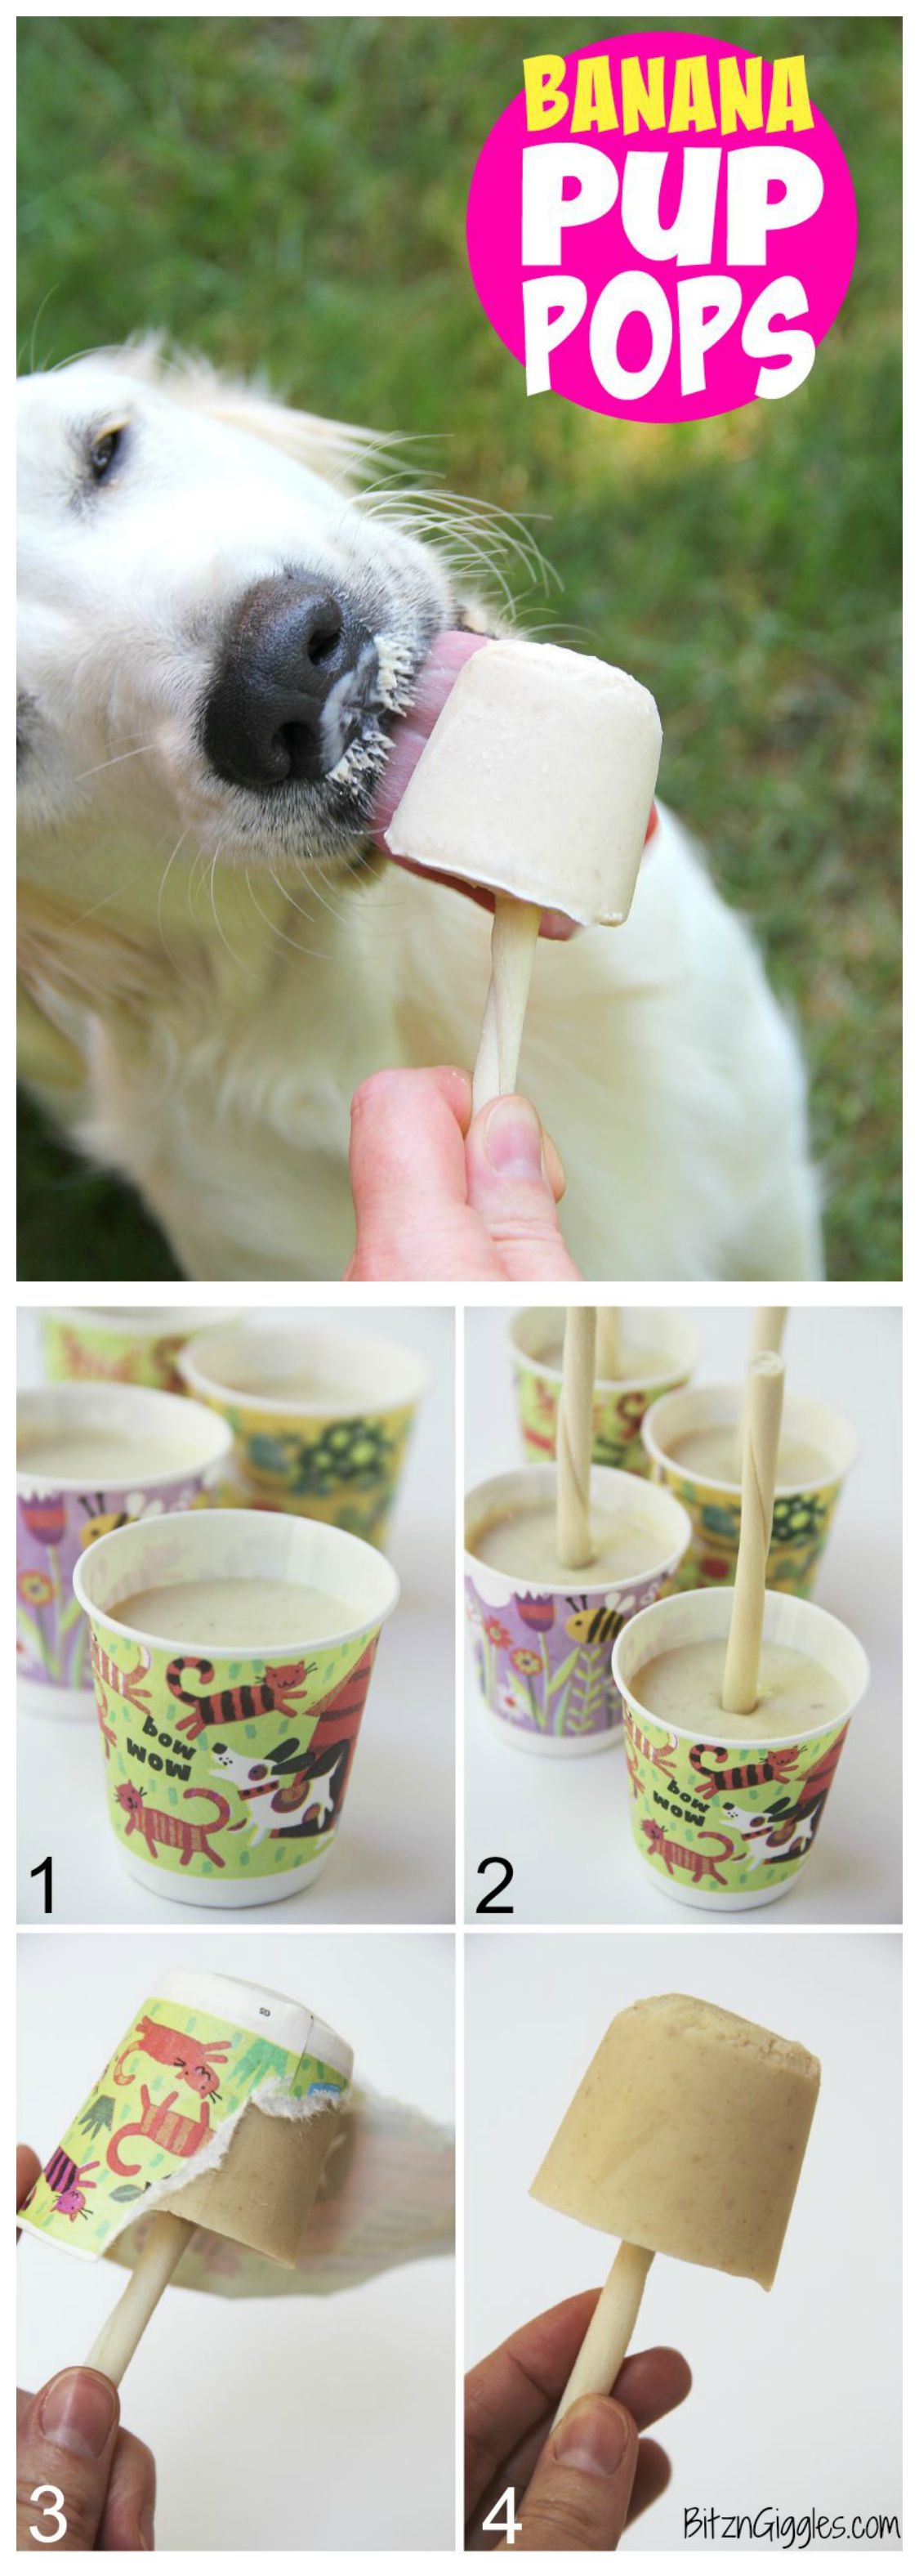 Banana Pup Pops - A delicious homemade creamy popsicle that your dog will love! Delicious and good for them too!